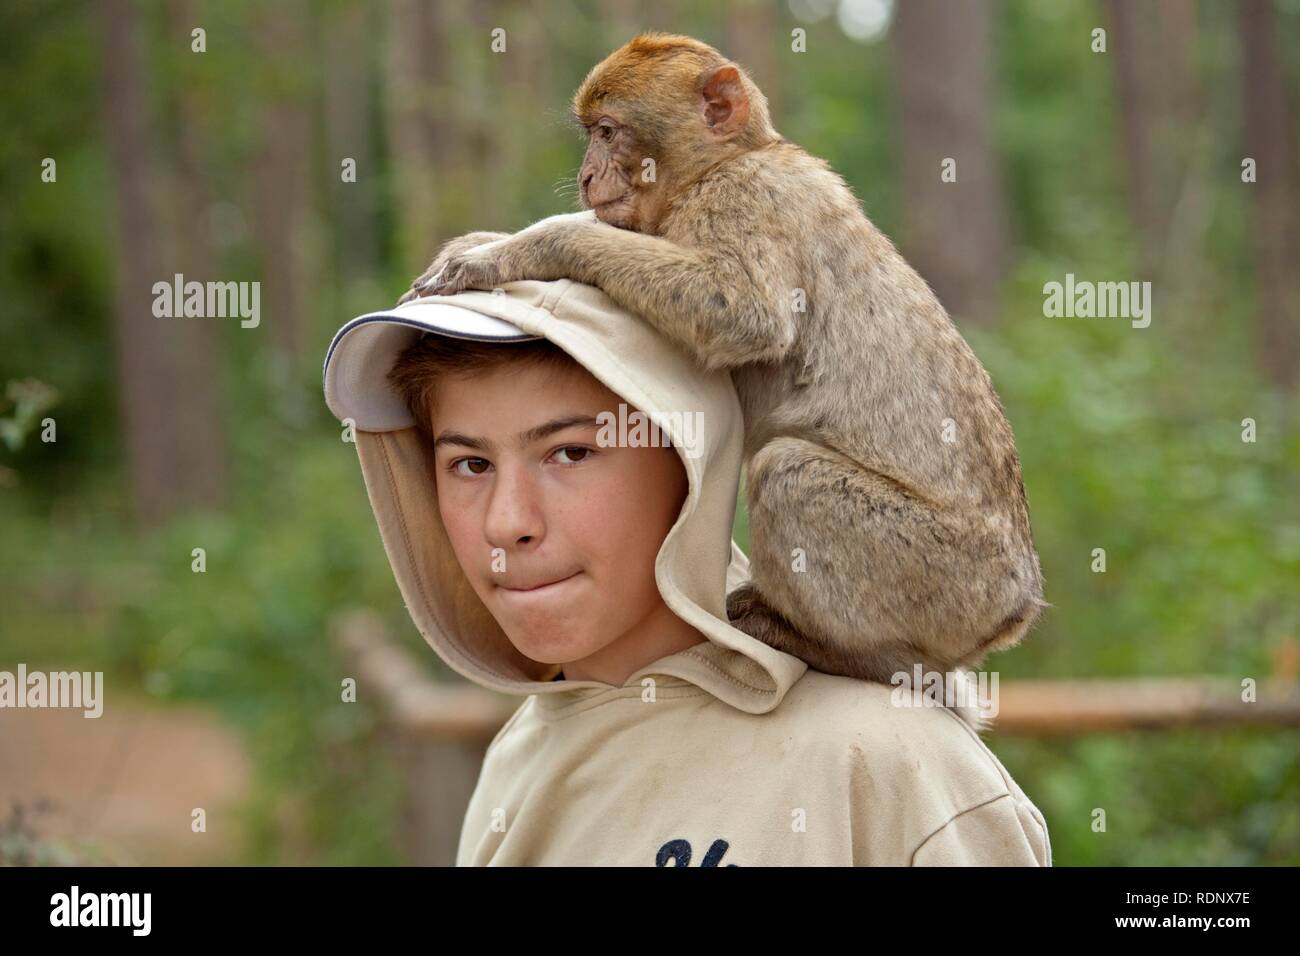 A Barbary Macaque (Macaca sylvanus) sitting on a boy's shoulders Stock Photo